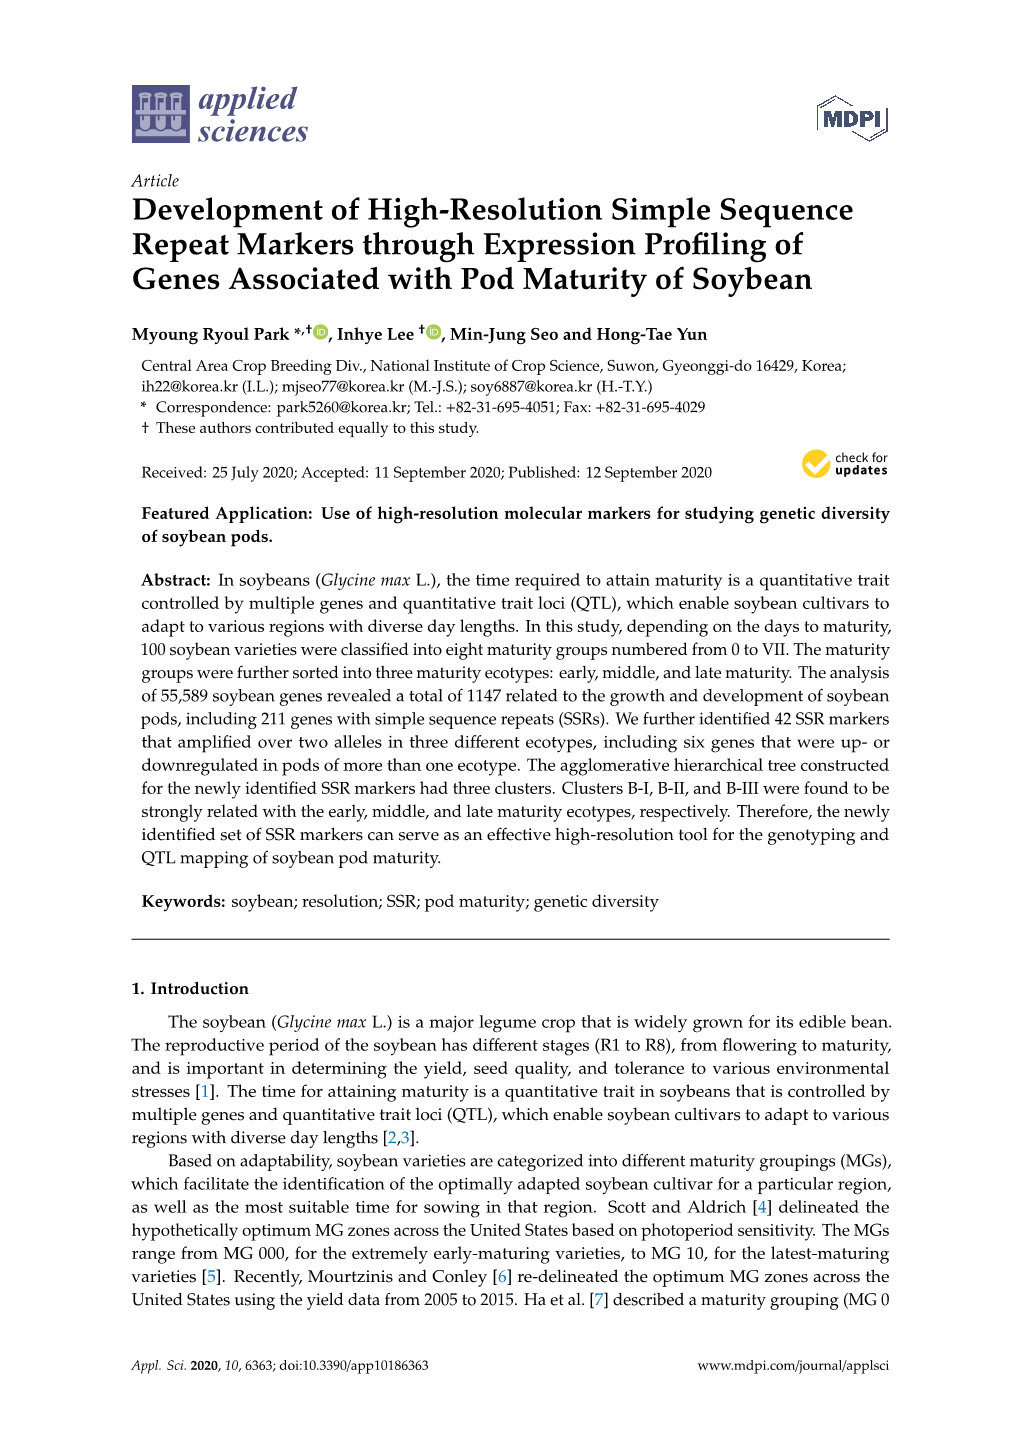 Development of High-Resolution Simple Sequence Repeat Markers Through Expression Profiling of Genes Associated with Pod Maturity of Soybean